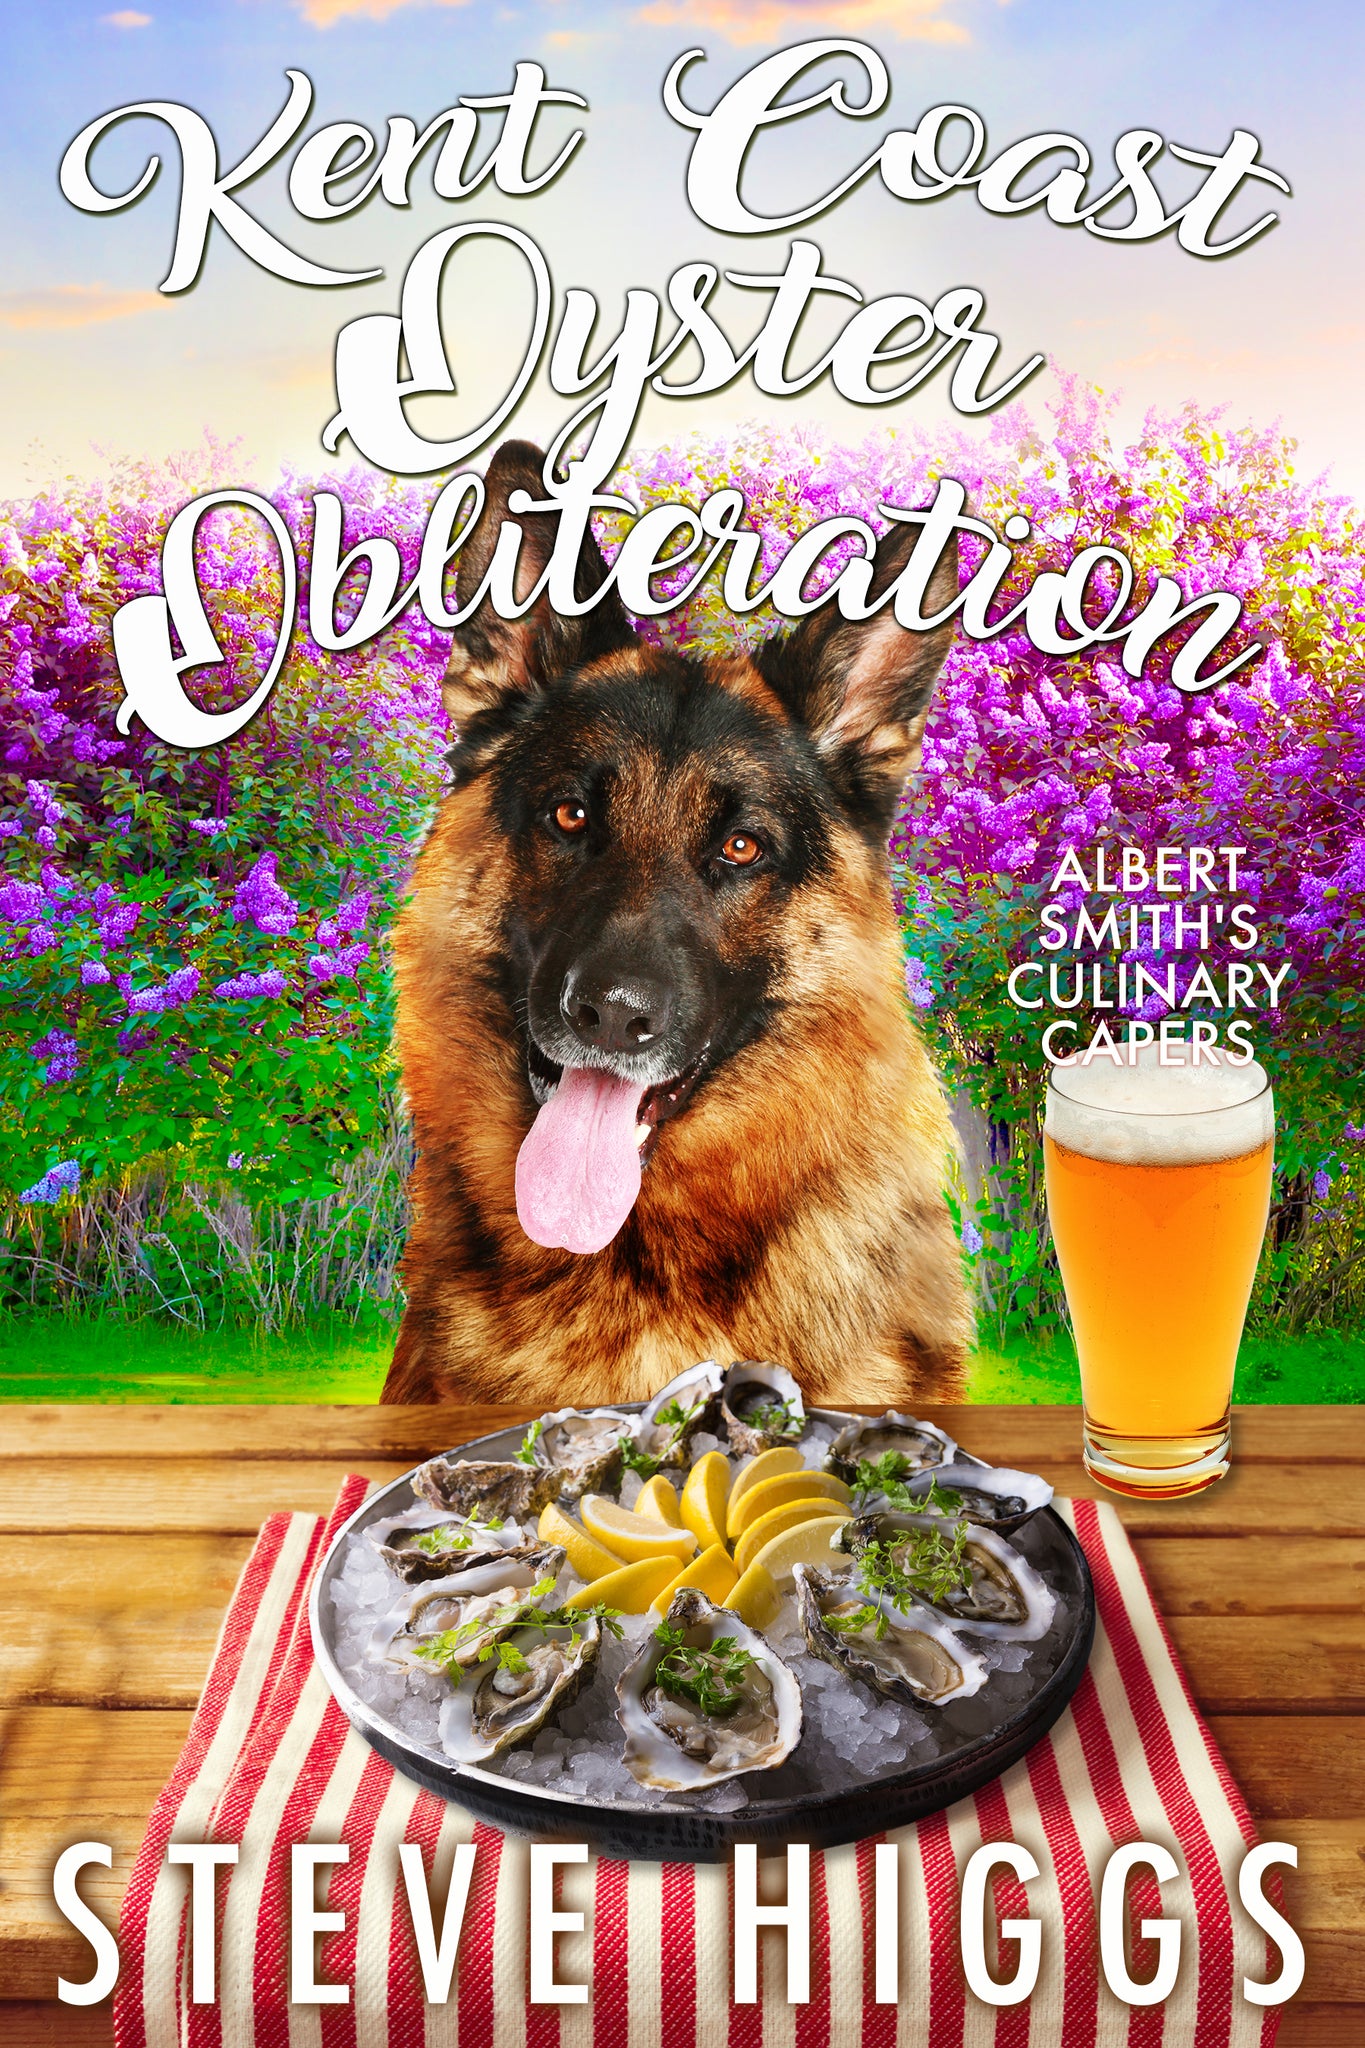 Kent Coast Oyster Obliteration : Albert Smith's Culinary Capers Recipe 11